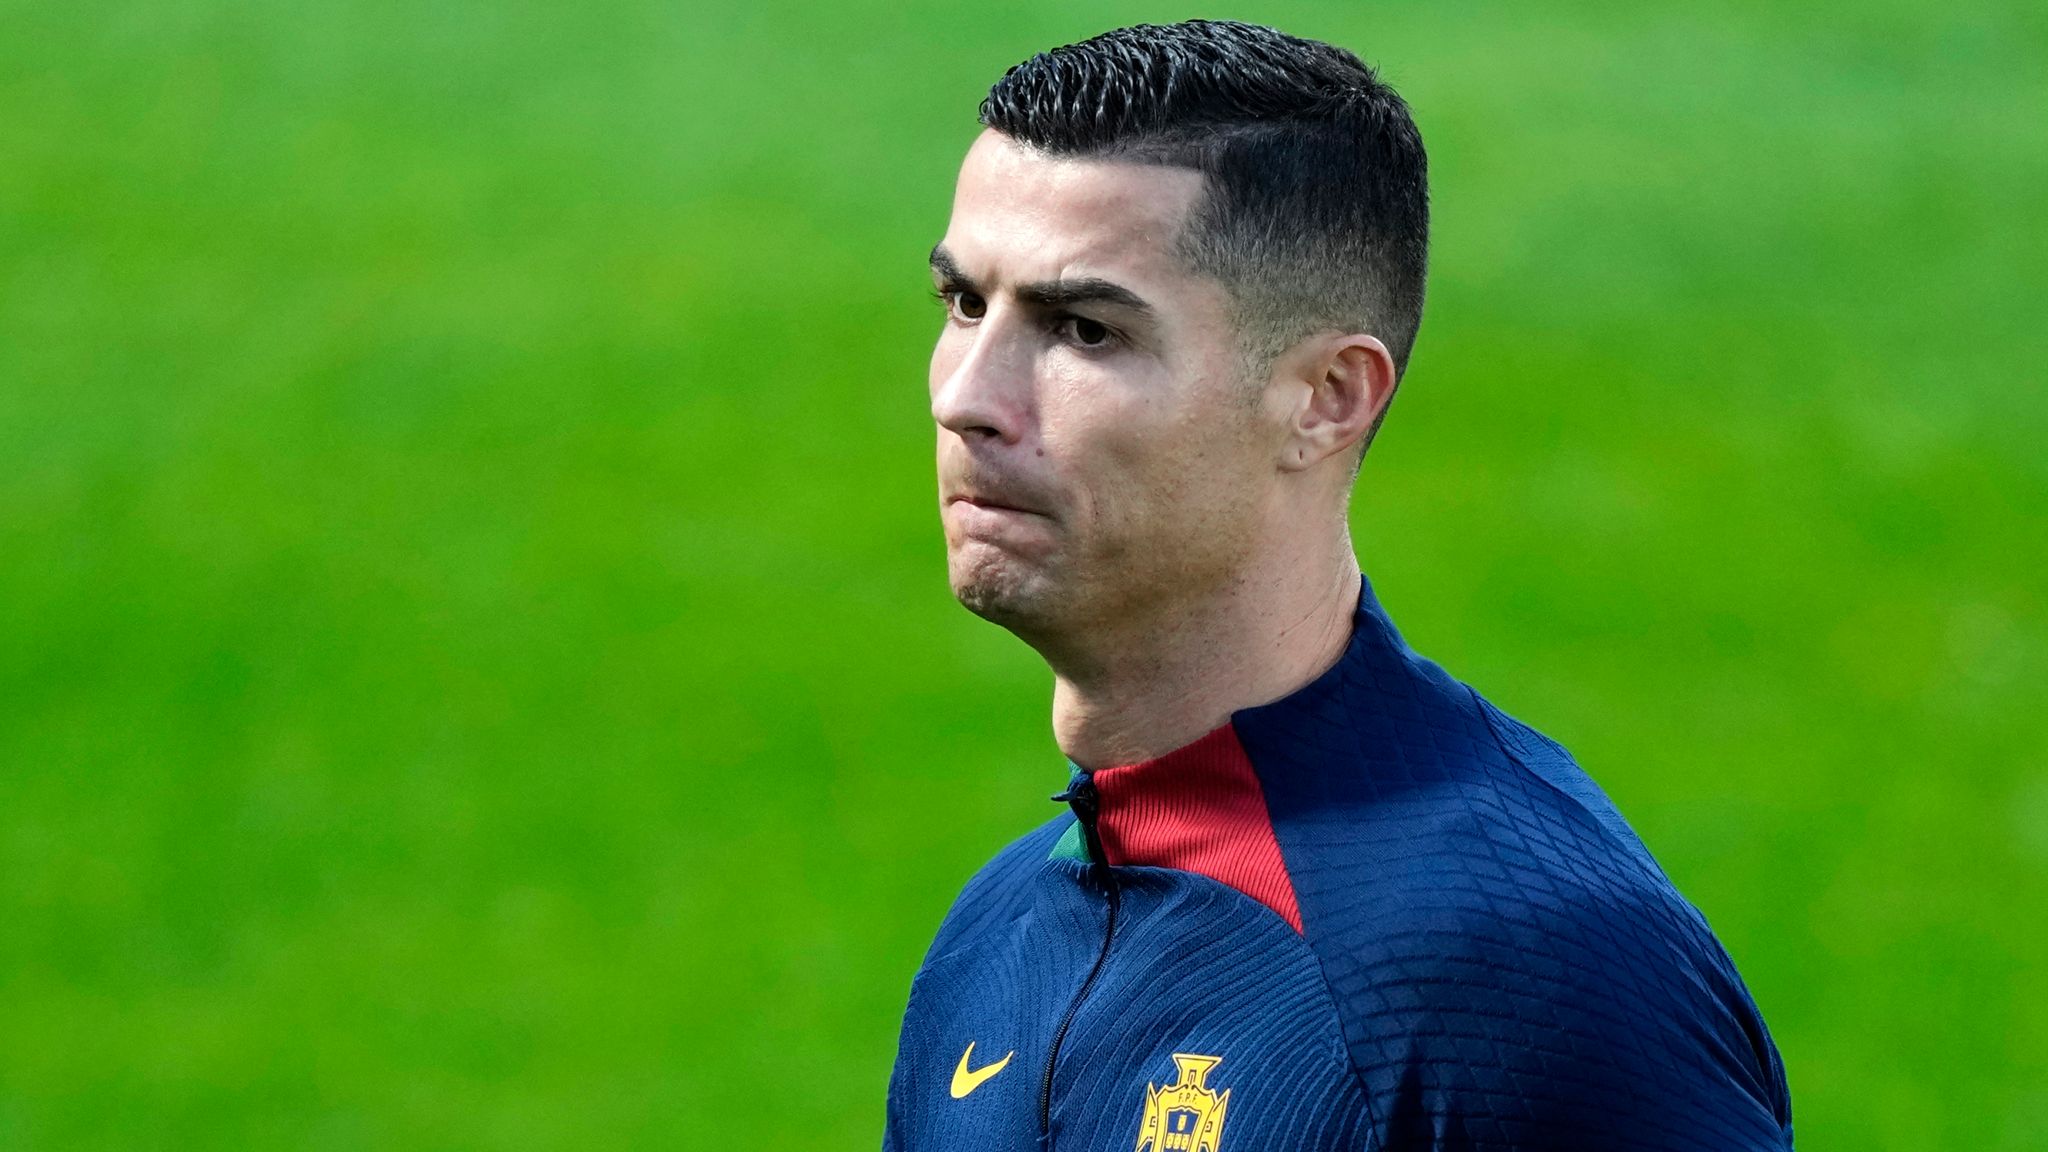 Cristiano Ronaldo getting stick from his Portugal team-mates at the  Confederations Cup... for new haircut | The Sun